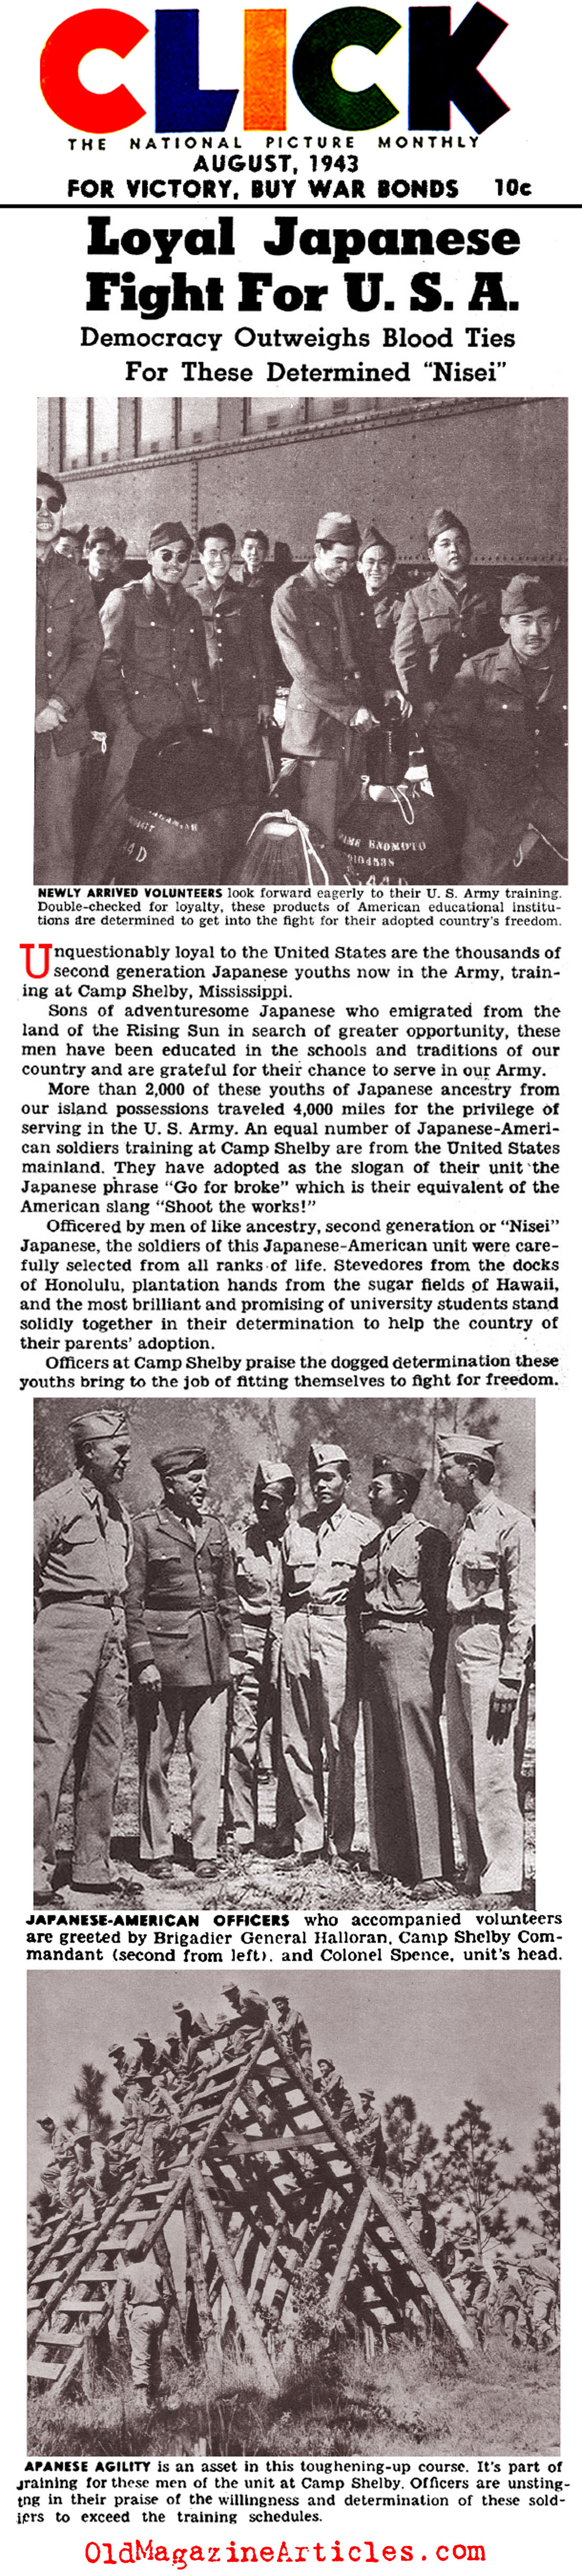 ''Loyal Japanese Fight for the U.S.A.'' (Click Magazine, 1943)